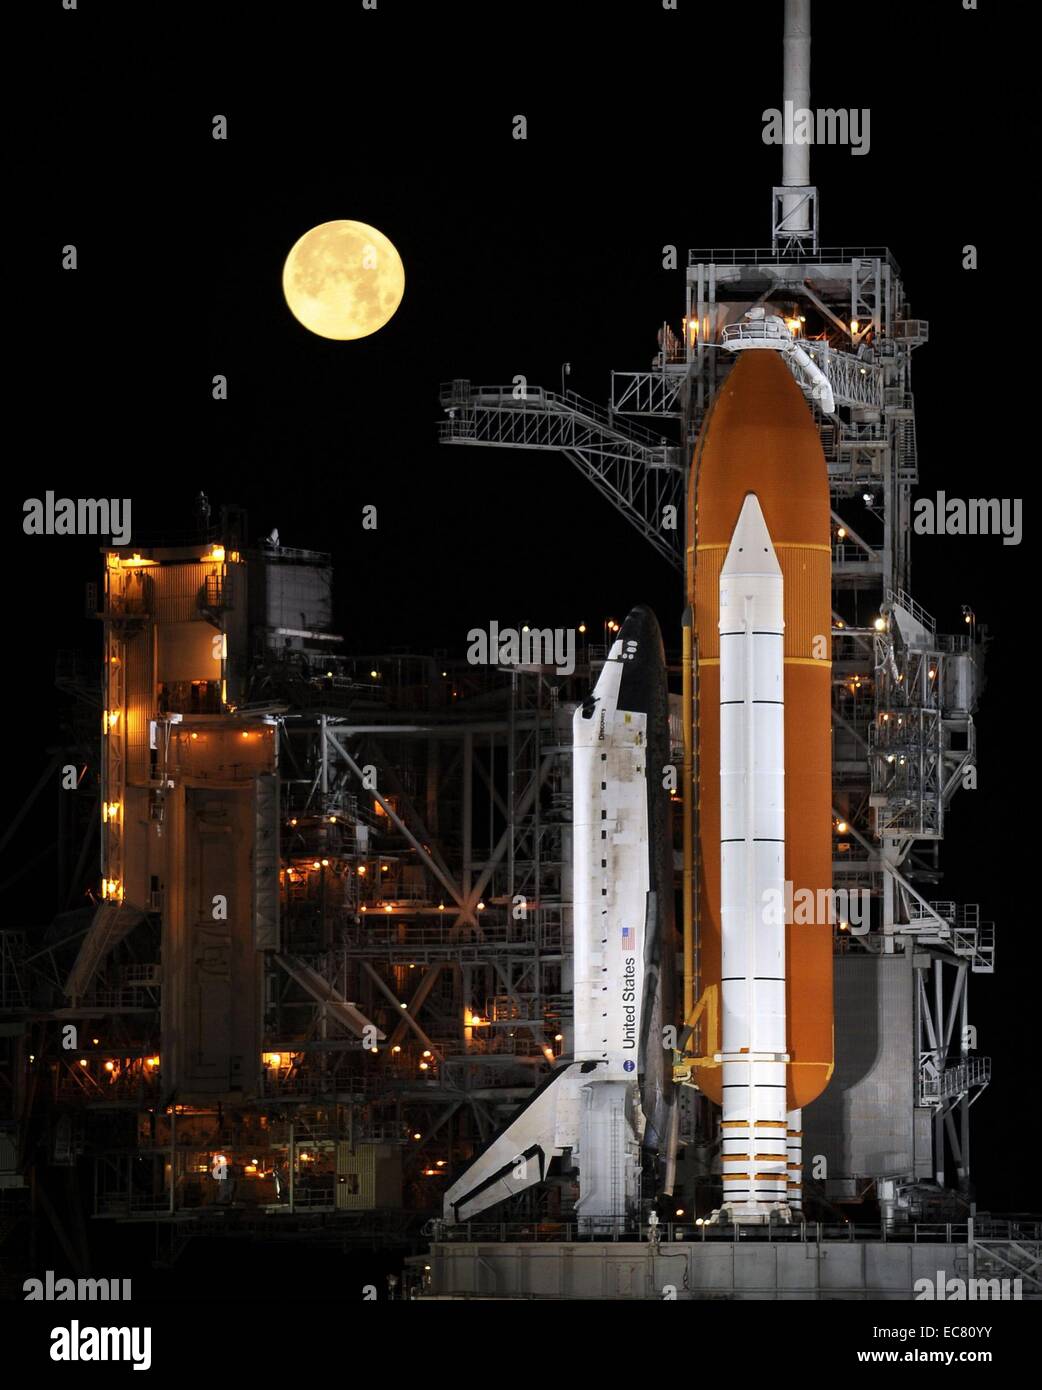 The Discovery space shuttle framed by a full moon. Its maiden flight was STS-41-D which launched on August 30, 1984. Over 27 years of service it flew 39 missions, gathering more flight time than any other spacecraft to date. Stock Photo